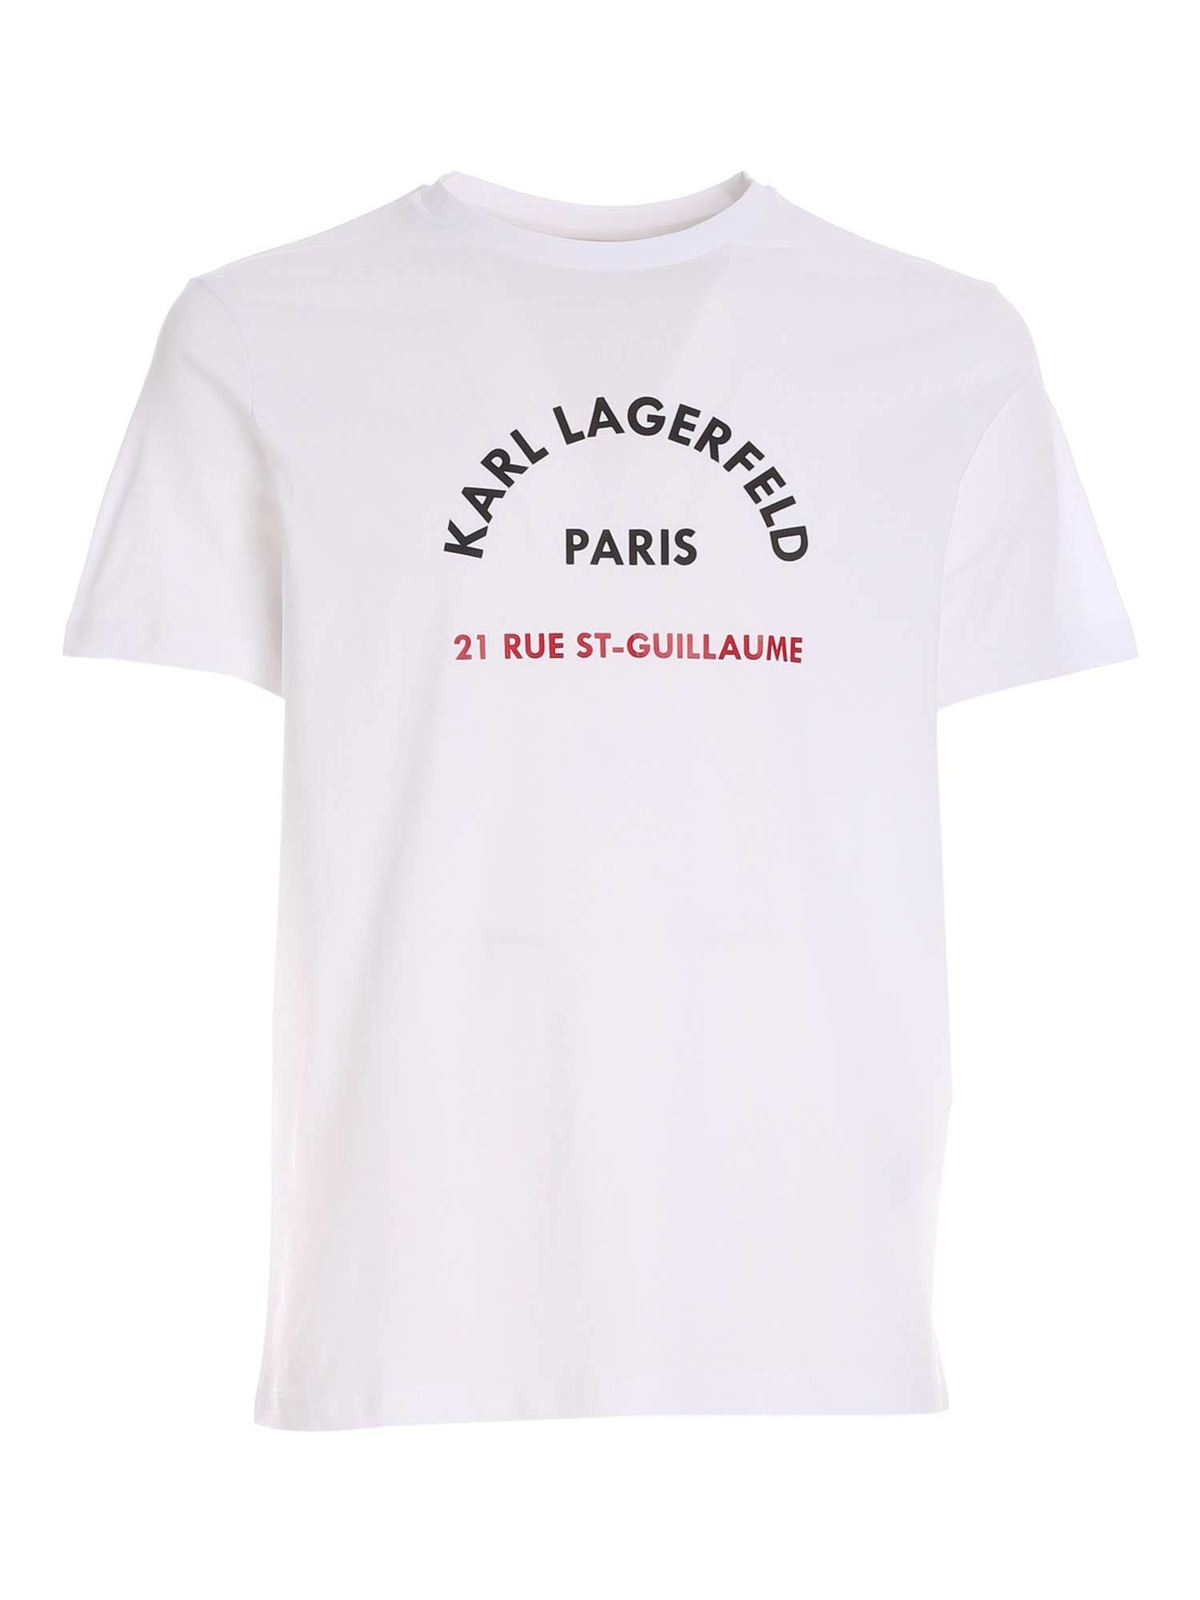 KARL LAGERFELD CONTRASTING PRINT T-SHIRT IN WHITE